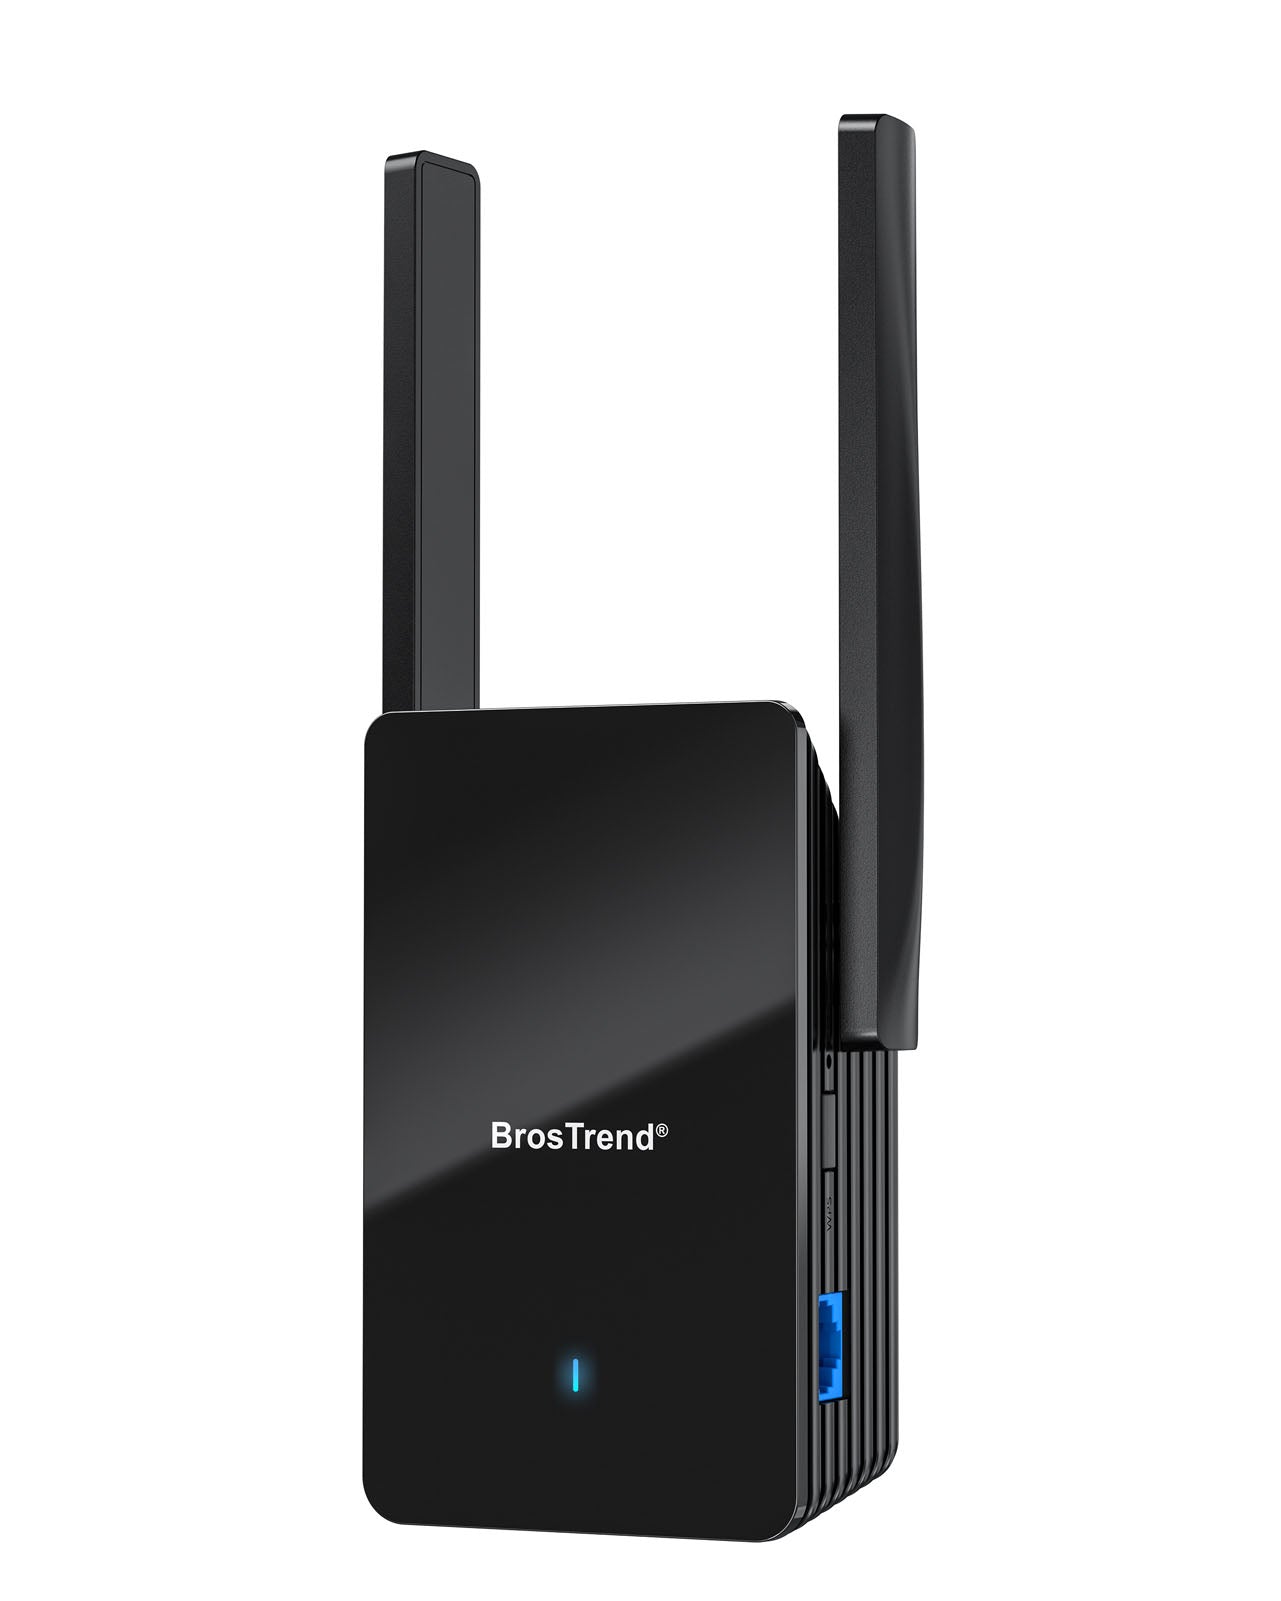 BrosTrend-AX3000-WiFi-6-Dual-Band-Extender-Boosts-Wireless-Coverage-Range-with-3000-Mbps-Dual-Band-Speeds-Works-with-Multiple-WiFi-Devices-Supports-160MHz-5GHz-Channel-Bandwidth-Beamforming.jpg__PID:fec35457-c72d-43c1-8be9-2caf609b8070